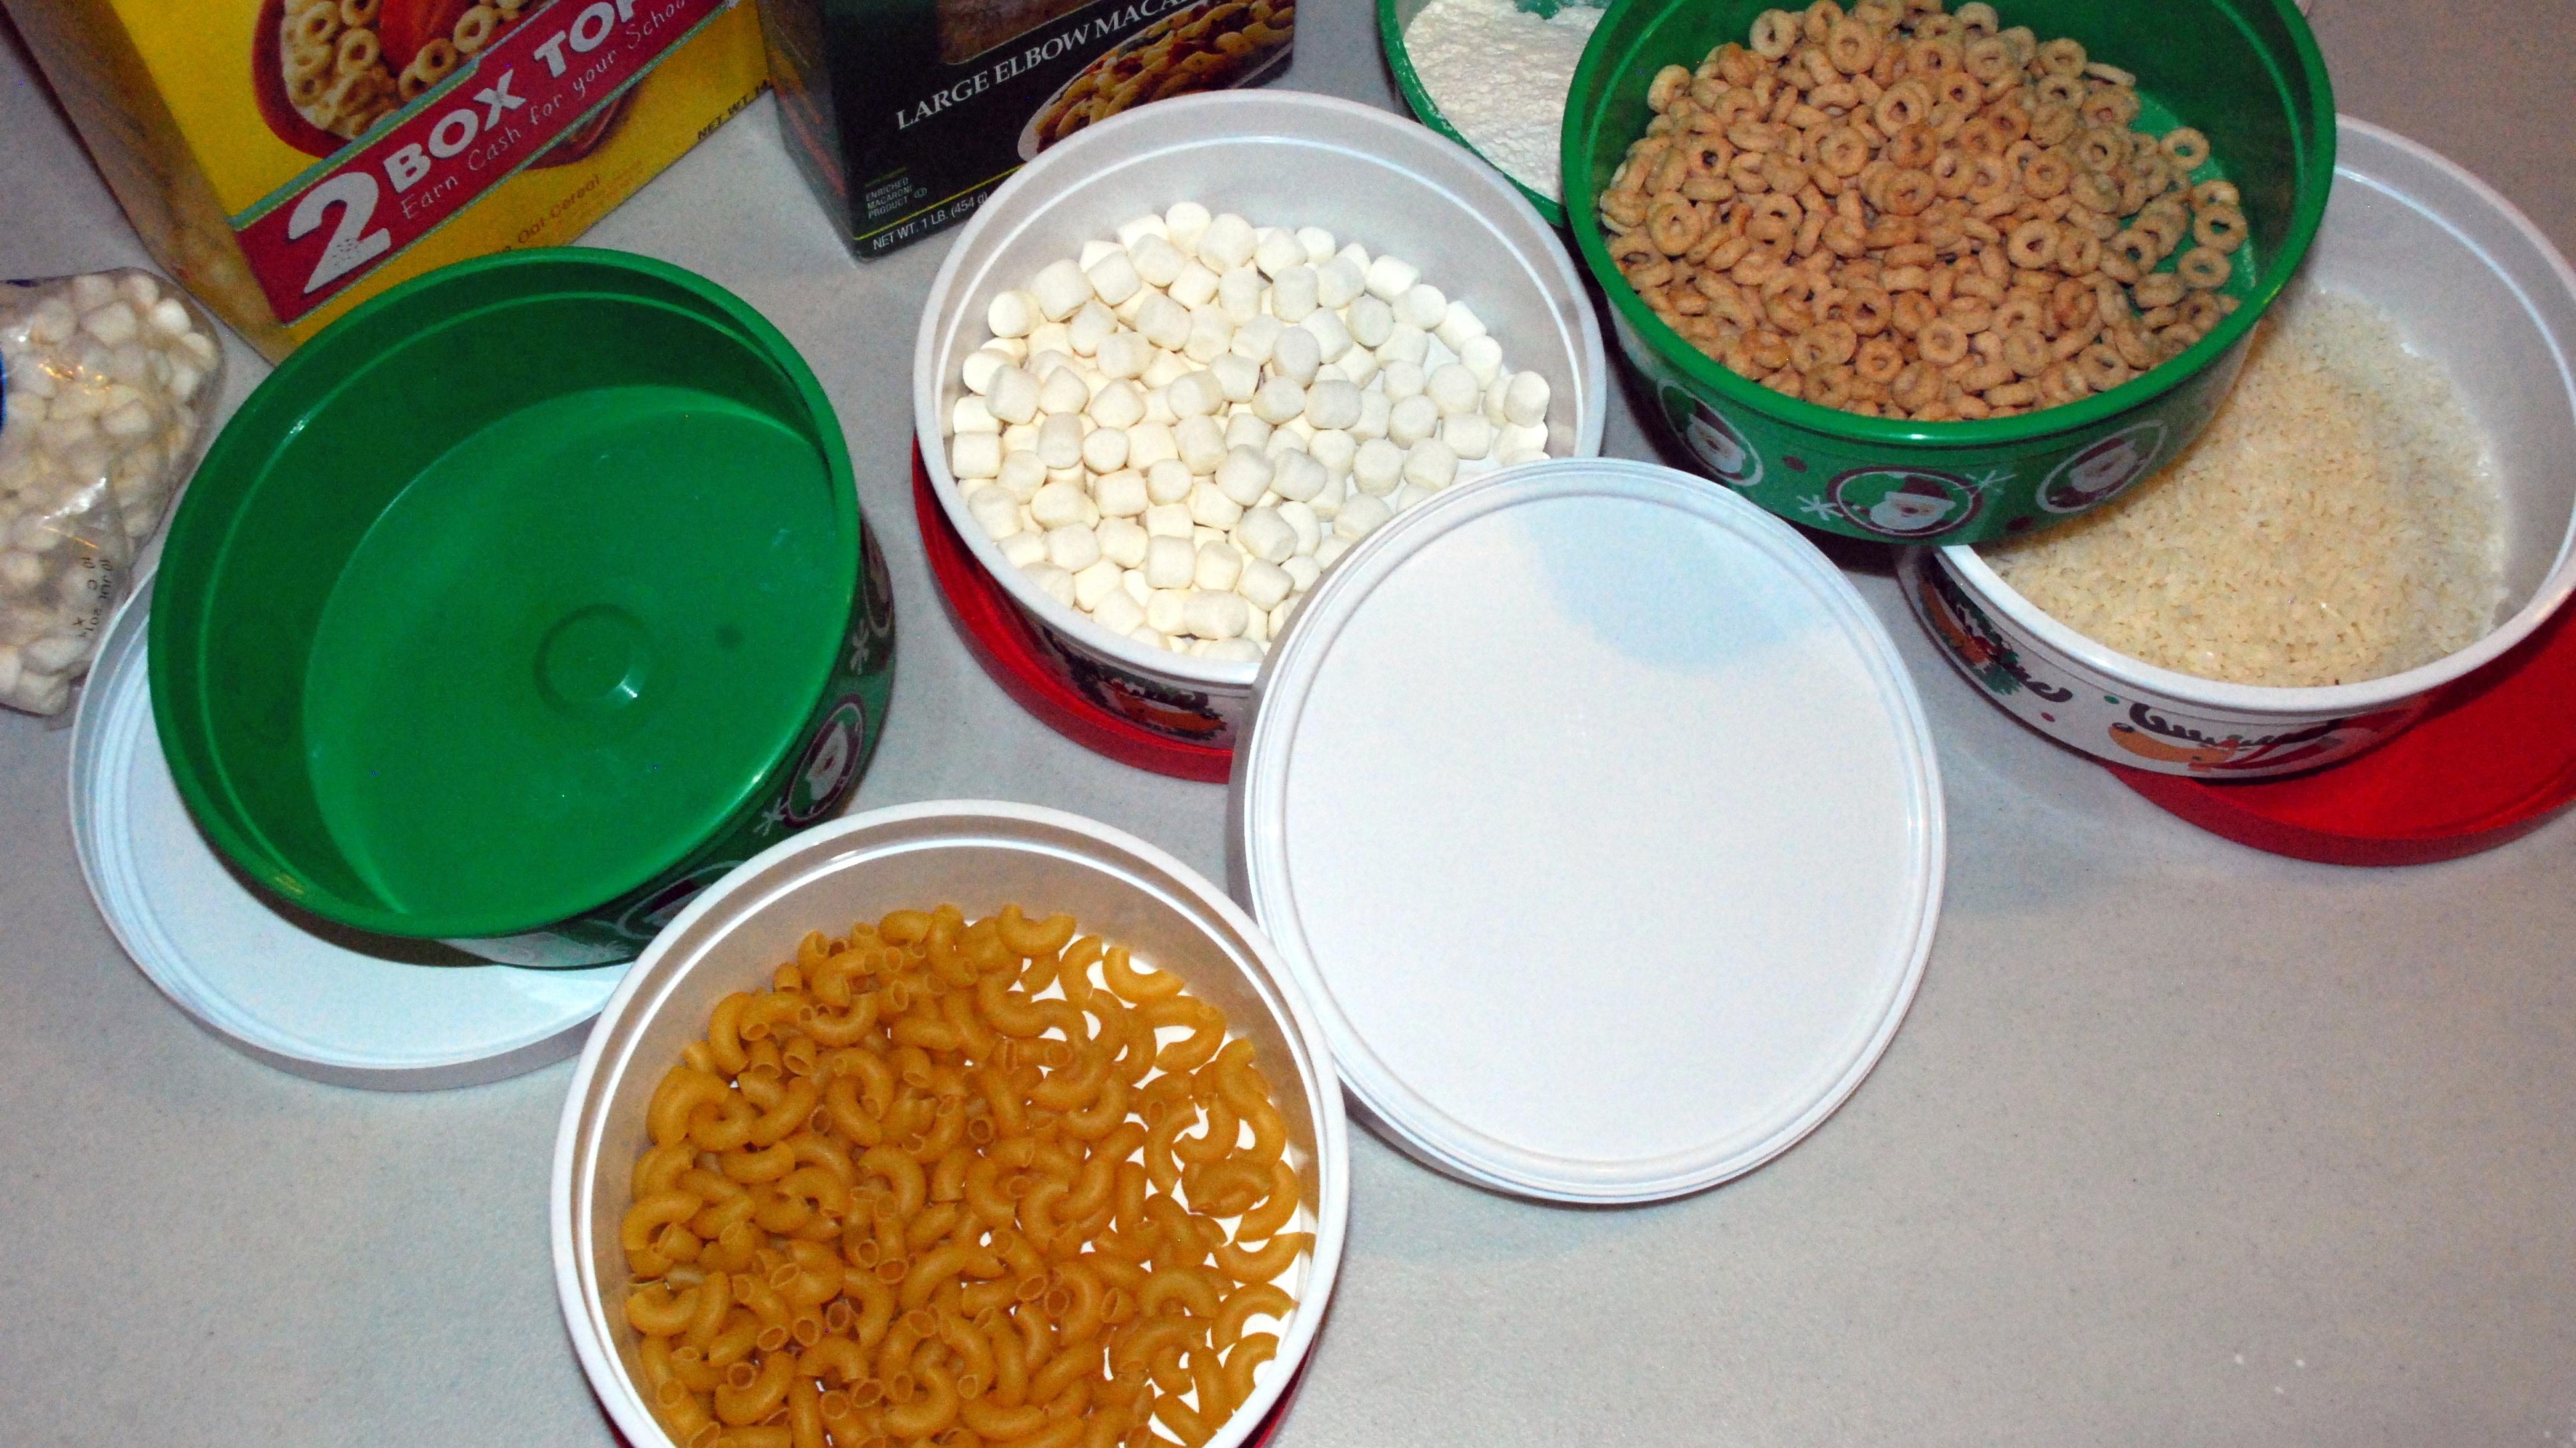 Five round storage containers. One is empty, one has elbow macaroni, the third has marshmallows in it, the forth has Cheerios, and the last one has rice.  